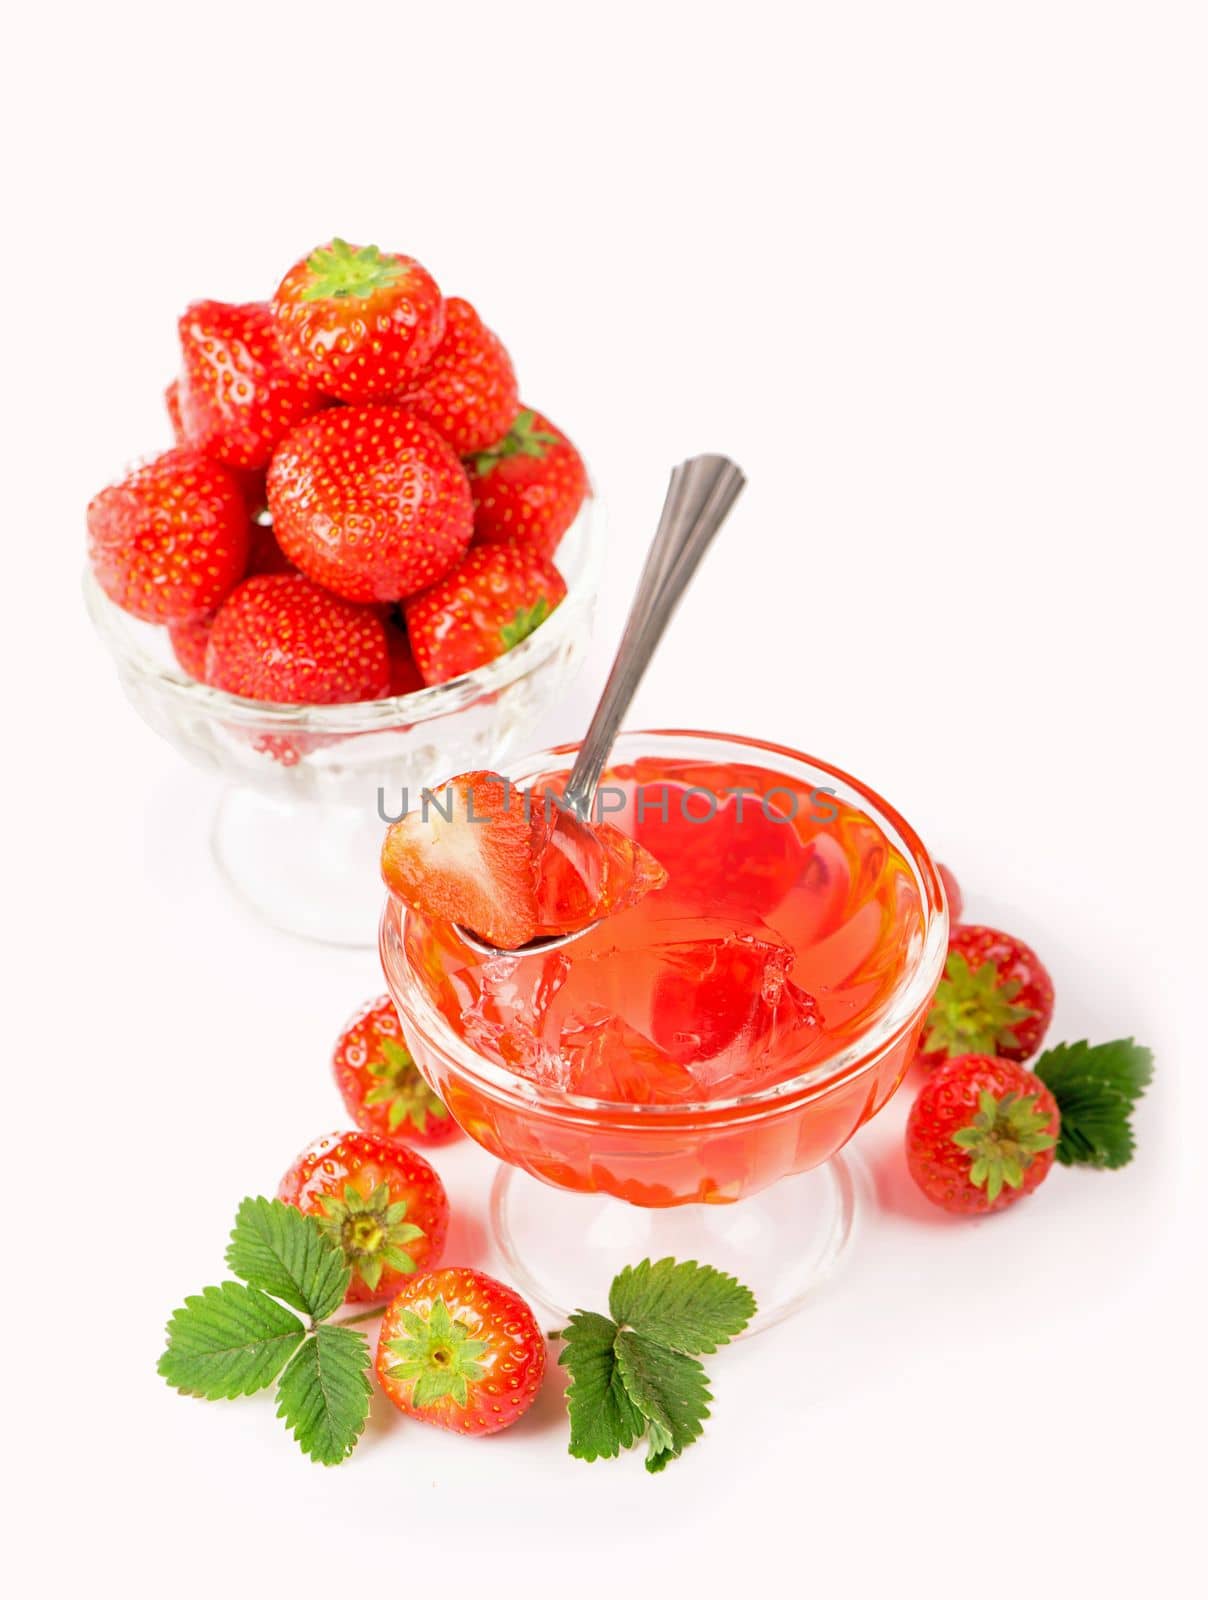 bowl with strawberries and jelly isolated on white background